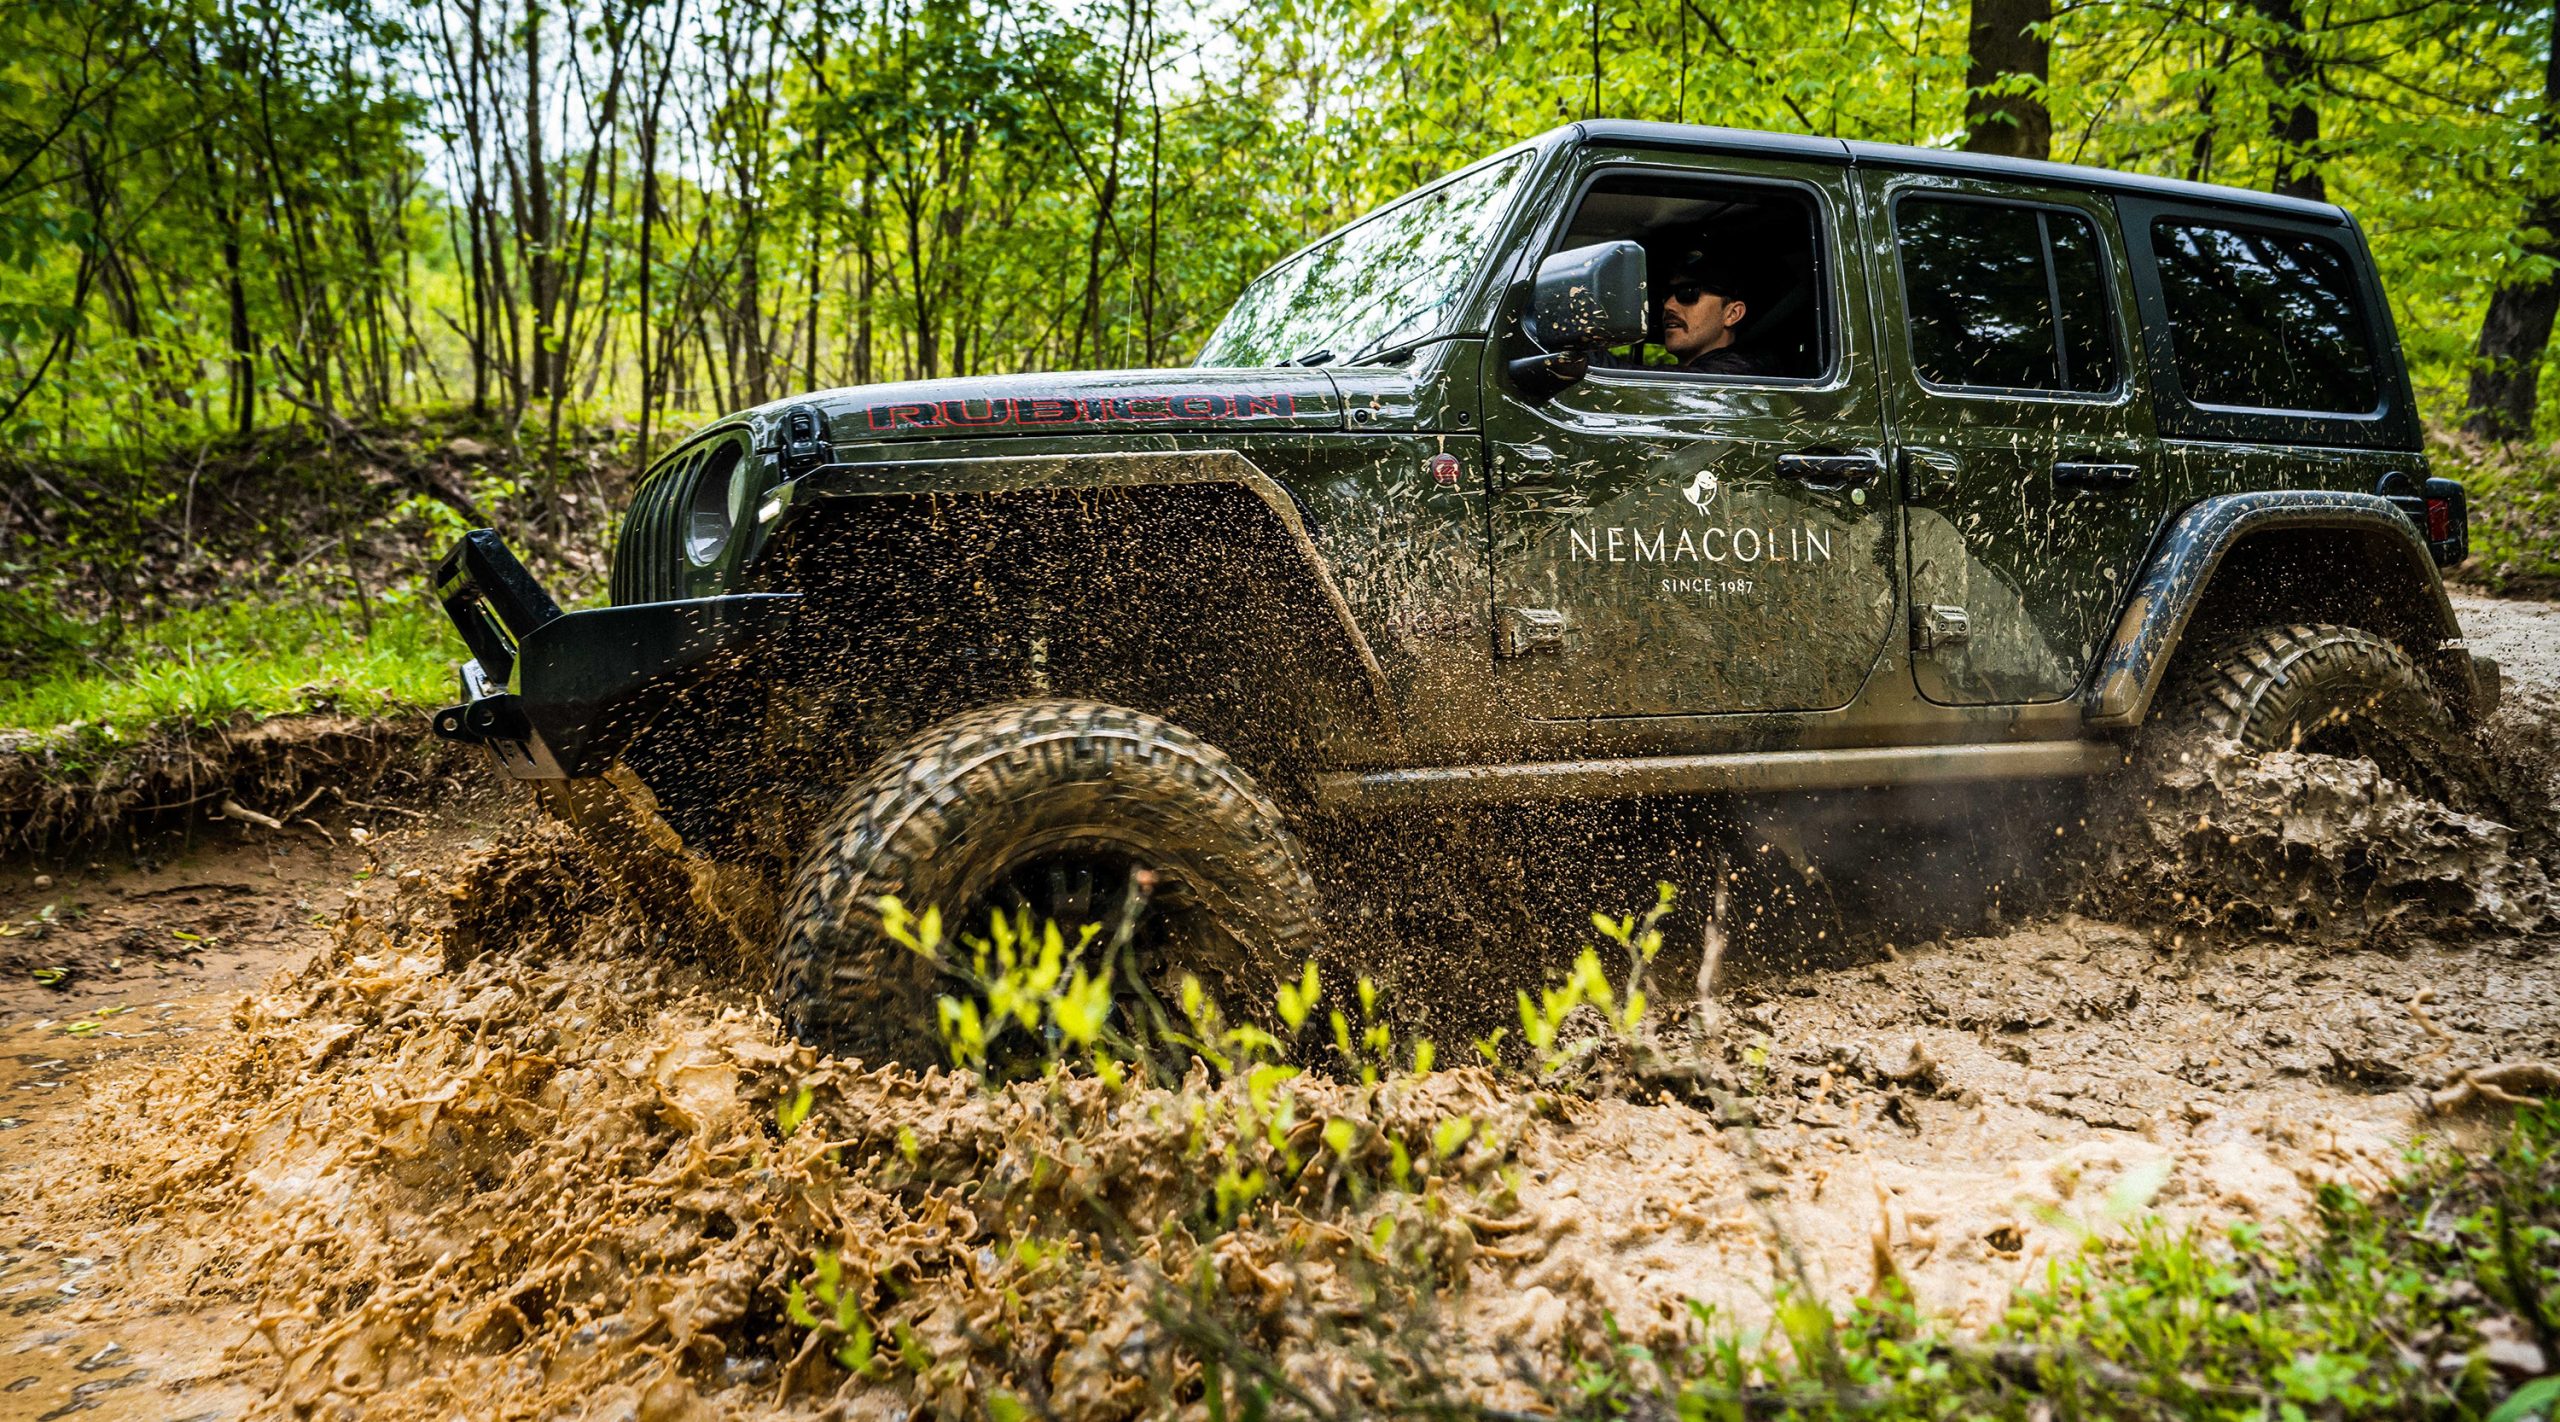 Nemacolin Jeep off-roading on a muddy trail in the woods